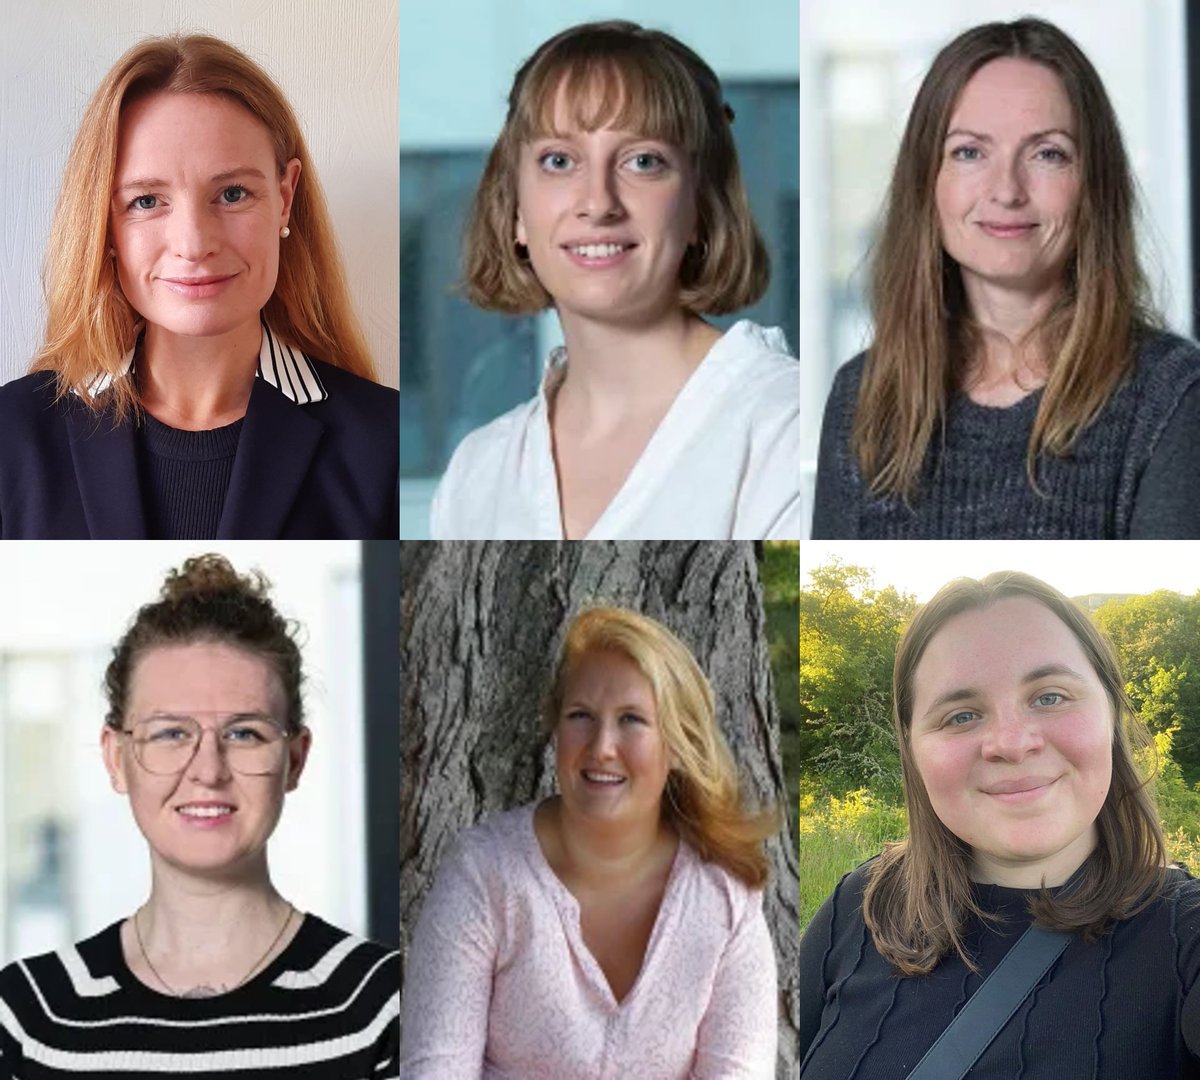 #InternationalWomensDay

Meet the women of @bluegovernance! In a recent LinkedIn post we highlighted the various projects they are working on.
👉linkedin.com/feed/update/ur… ♀️💫

@EmpowerUs_EU @MarineSABRES @ObamaNext @SEAwiseproject @Permagov_EU @ecotiparcticEU @SAB_Netwk #aauarctic